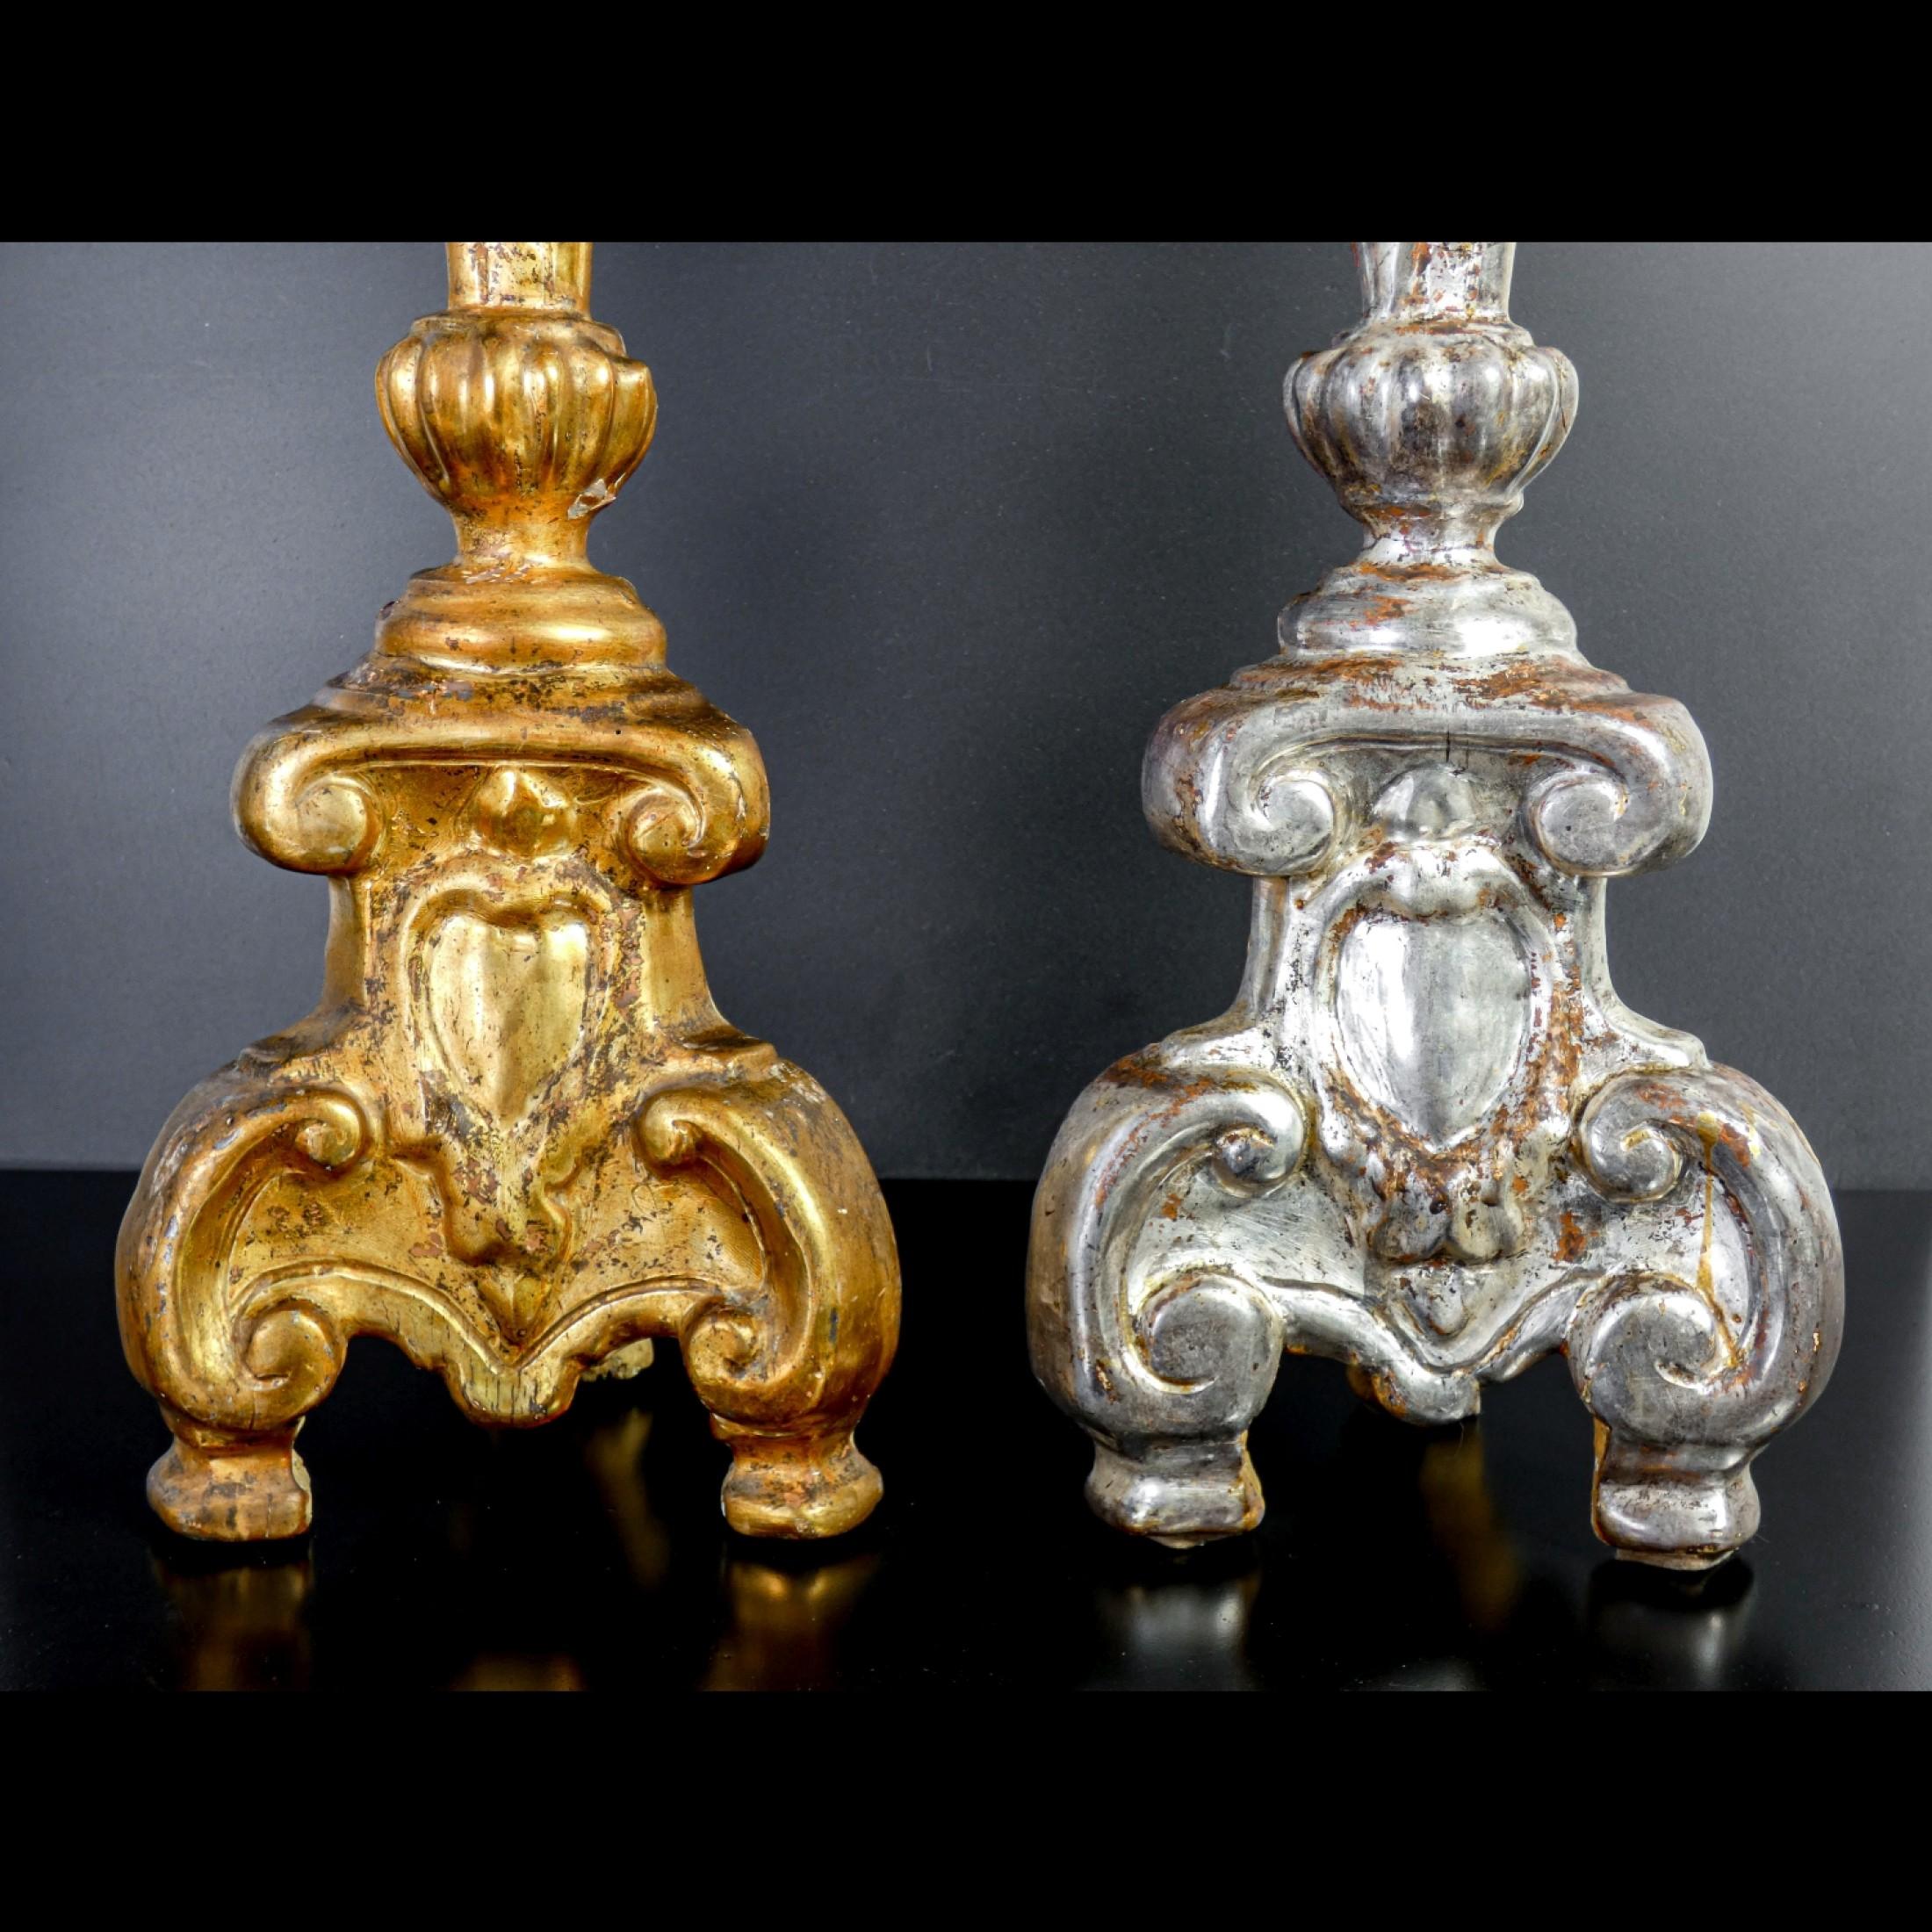 Carved Original Louis XV Candlesticks, Silver Leaf and Mecca Gilding, Italy, 1740-1750